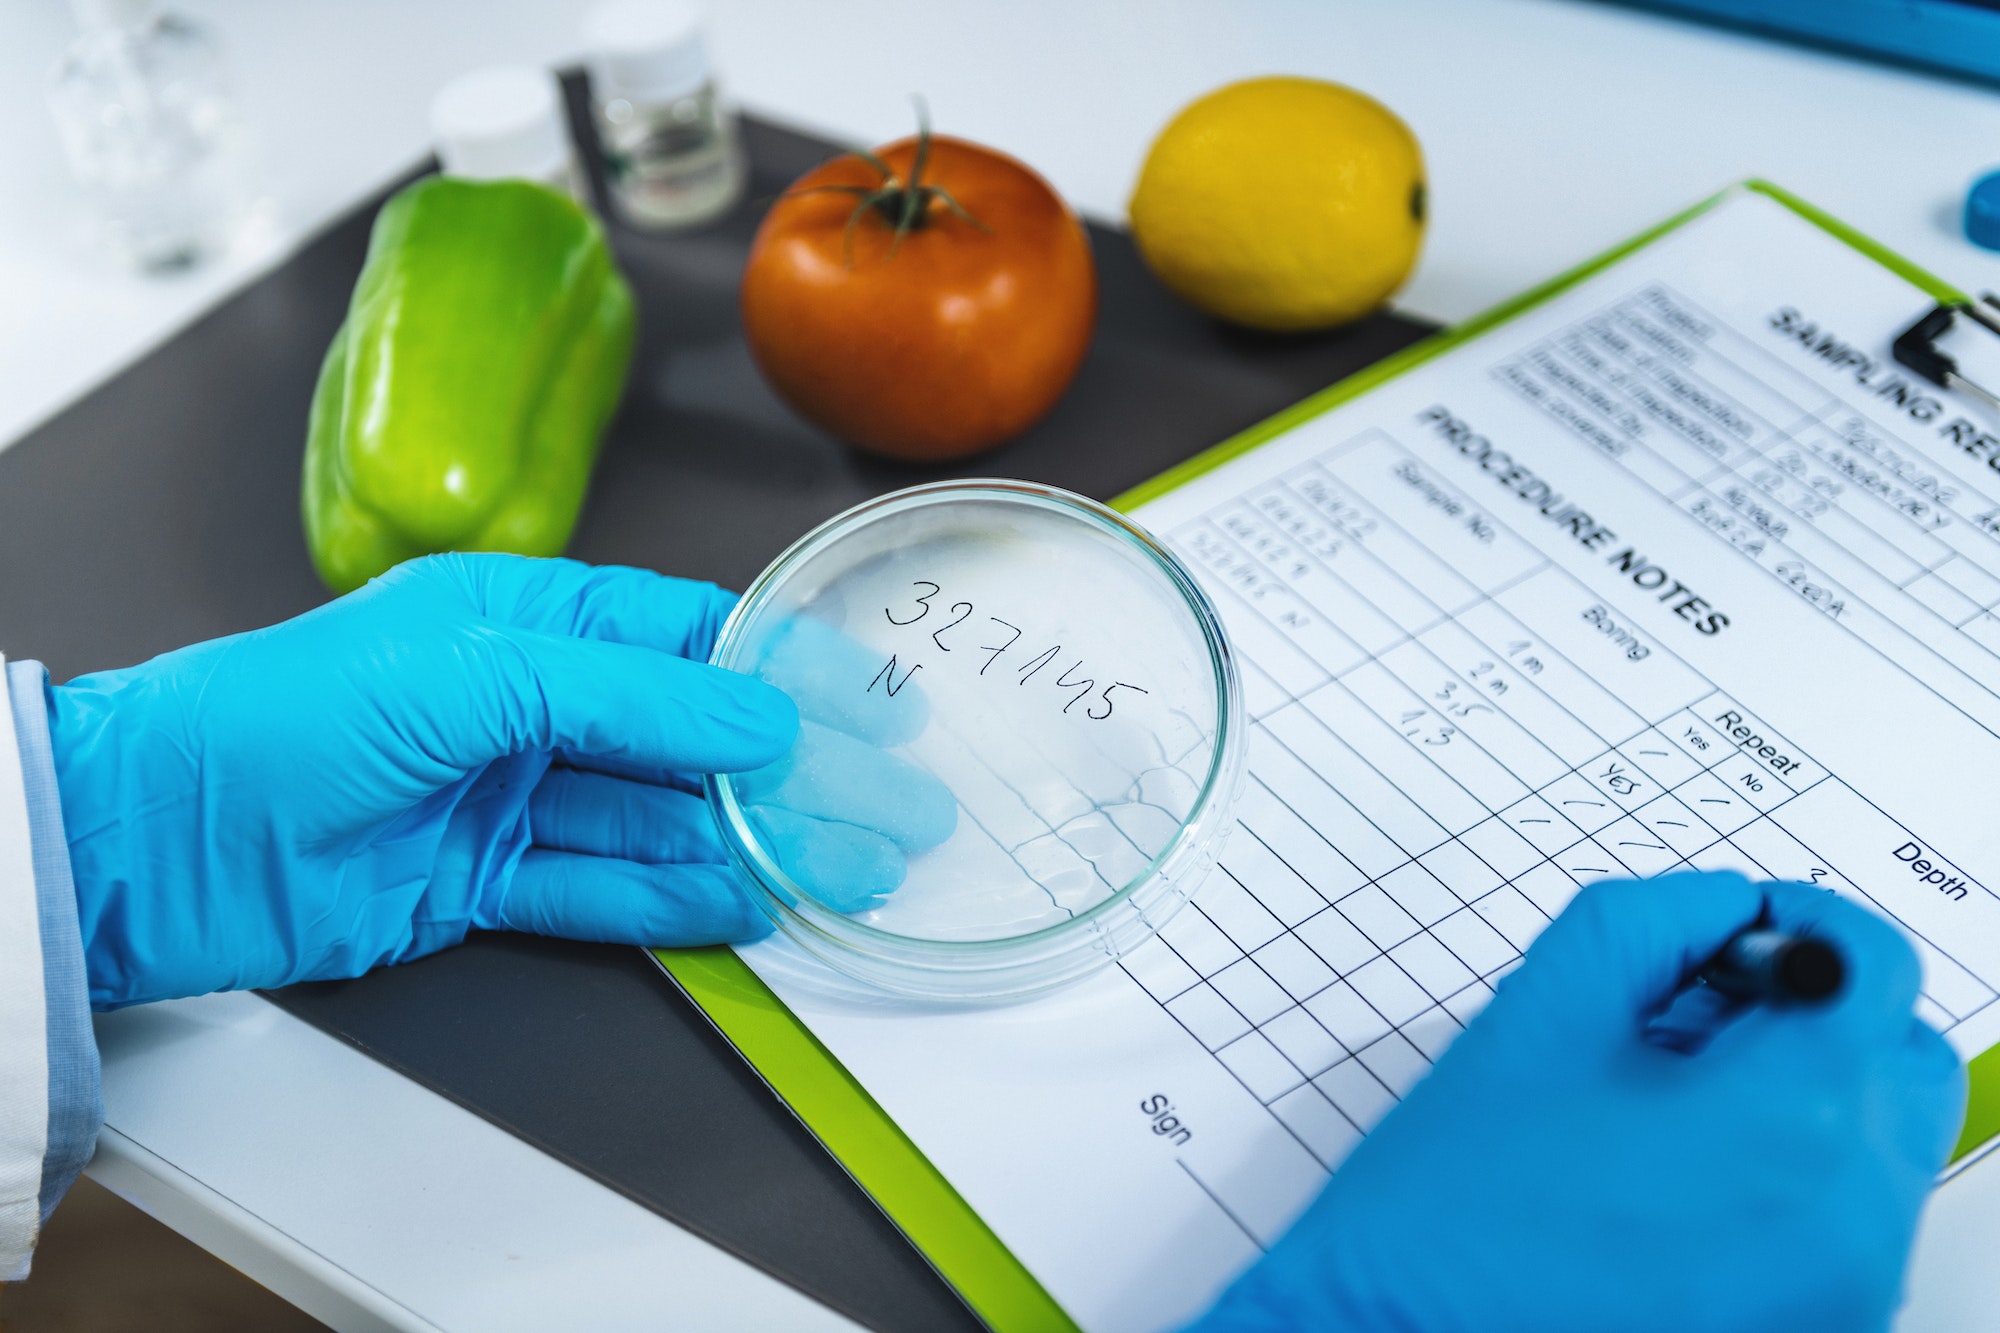 Food Quality Assessment in Microbiology Laboratory